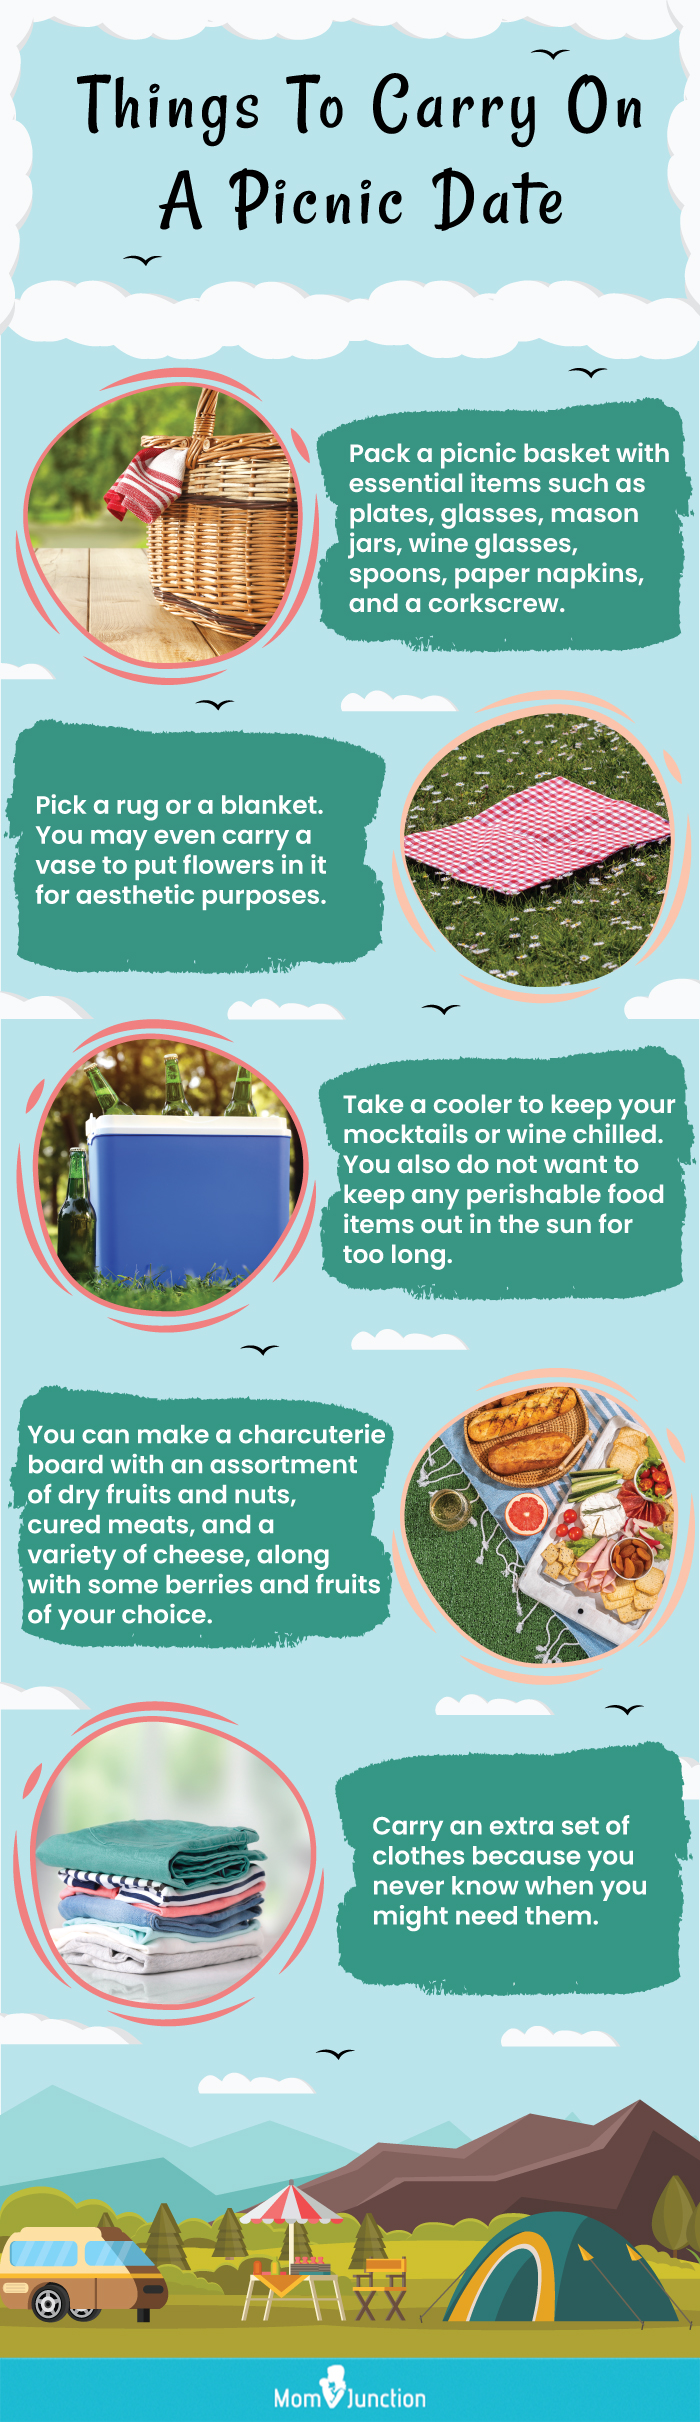 things to carry on a picnic date [infographic]